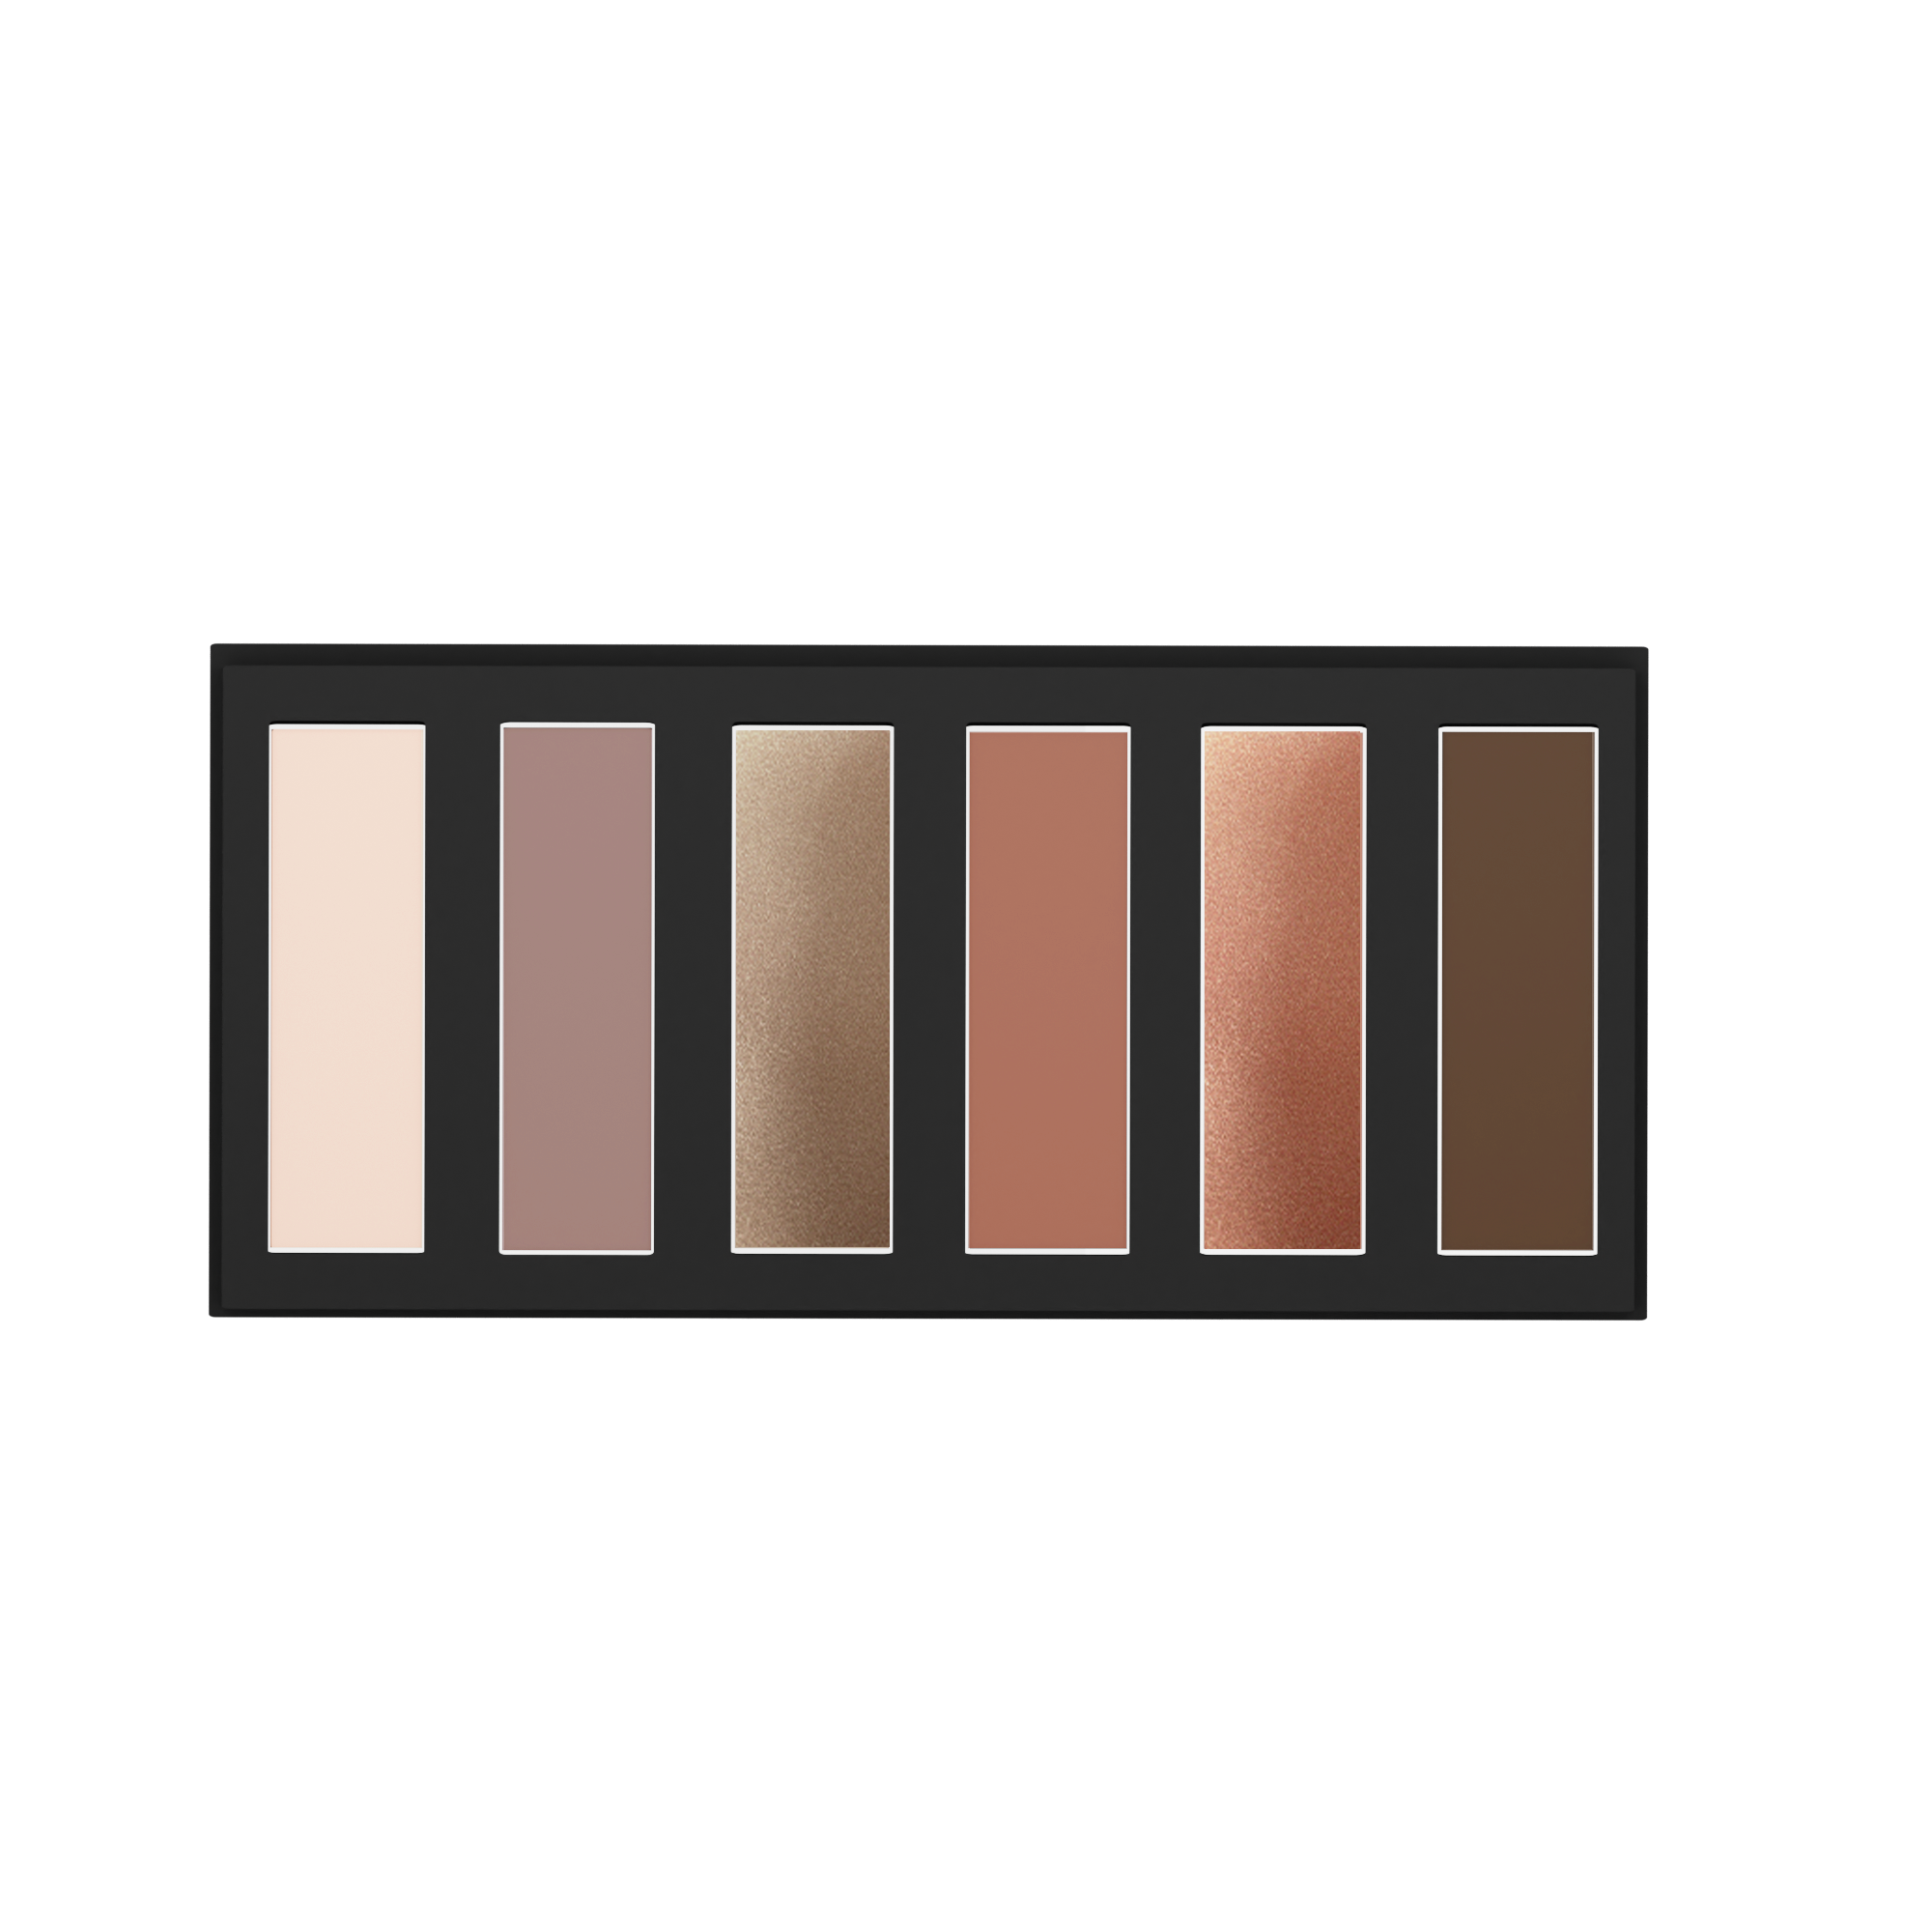 Lidschatten | Make-up | You are the One Eye Palette | Judith Williams